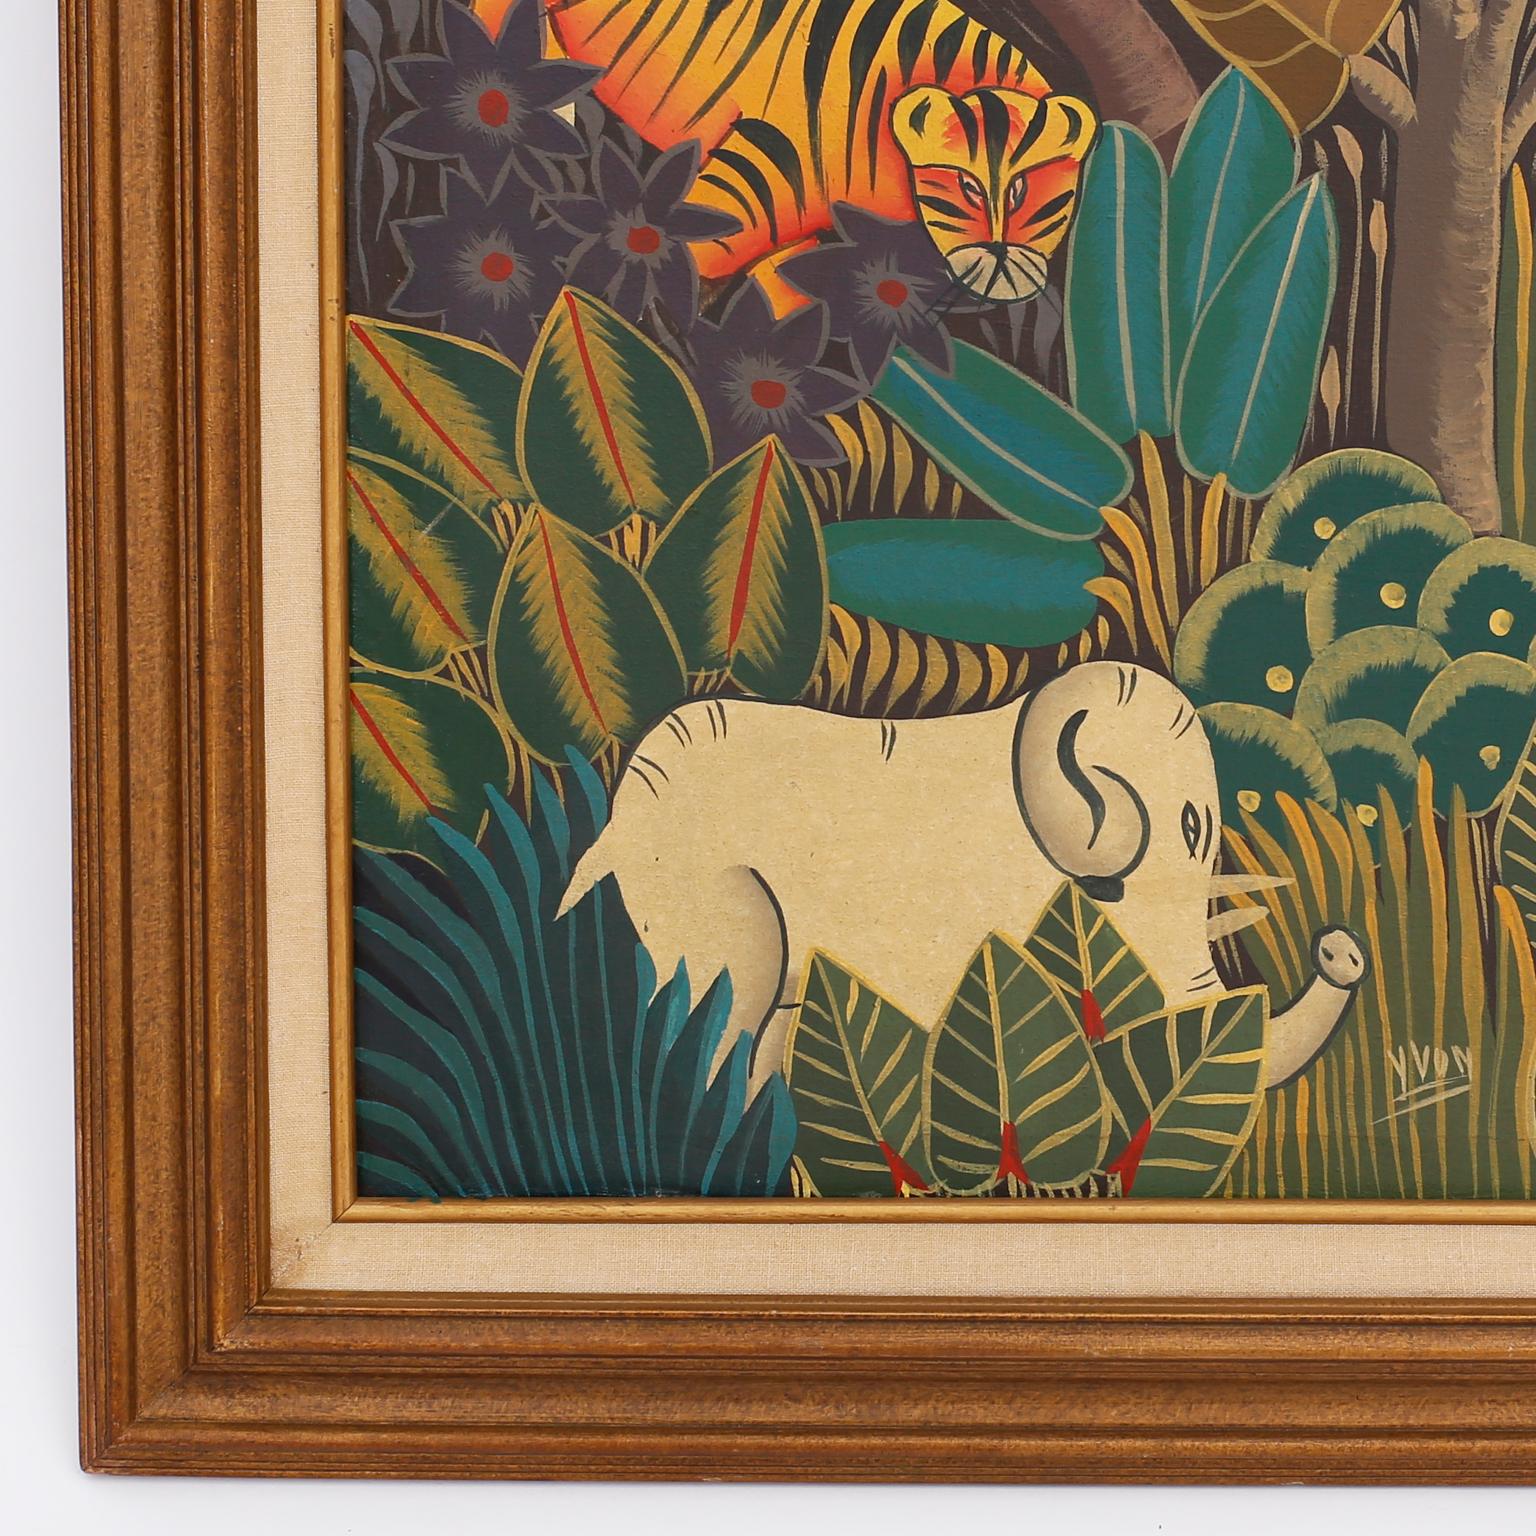 Whimsical oil painting on canvas with tigers and elephants in a stylized jungle setting, painted in a folky, naive style typical of Haitian artists. Signed Yvon at the bottom and presented in a wood frame.